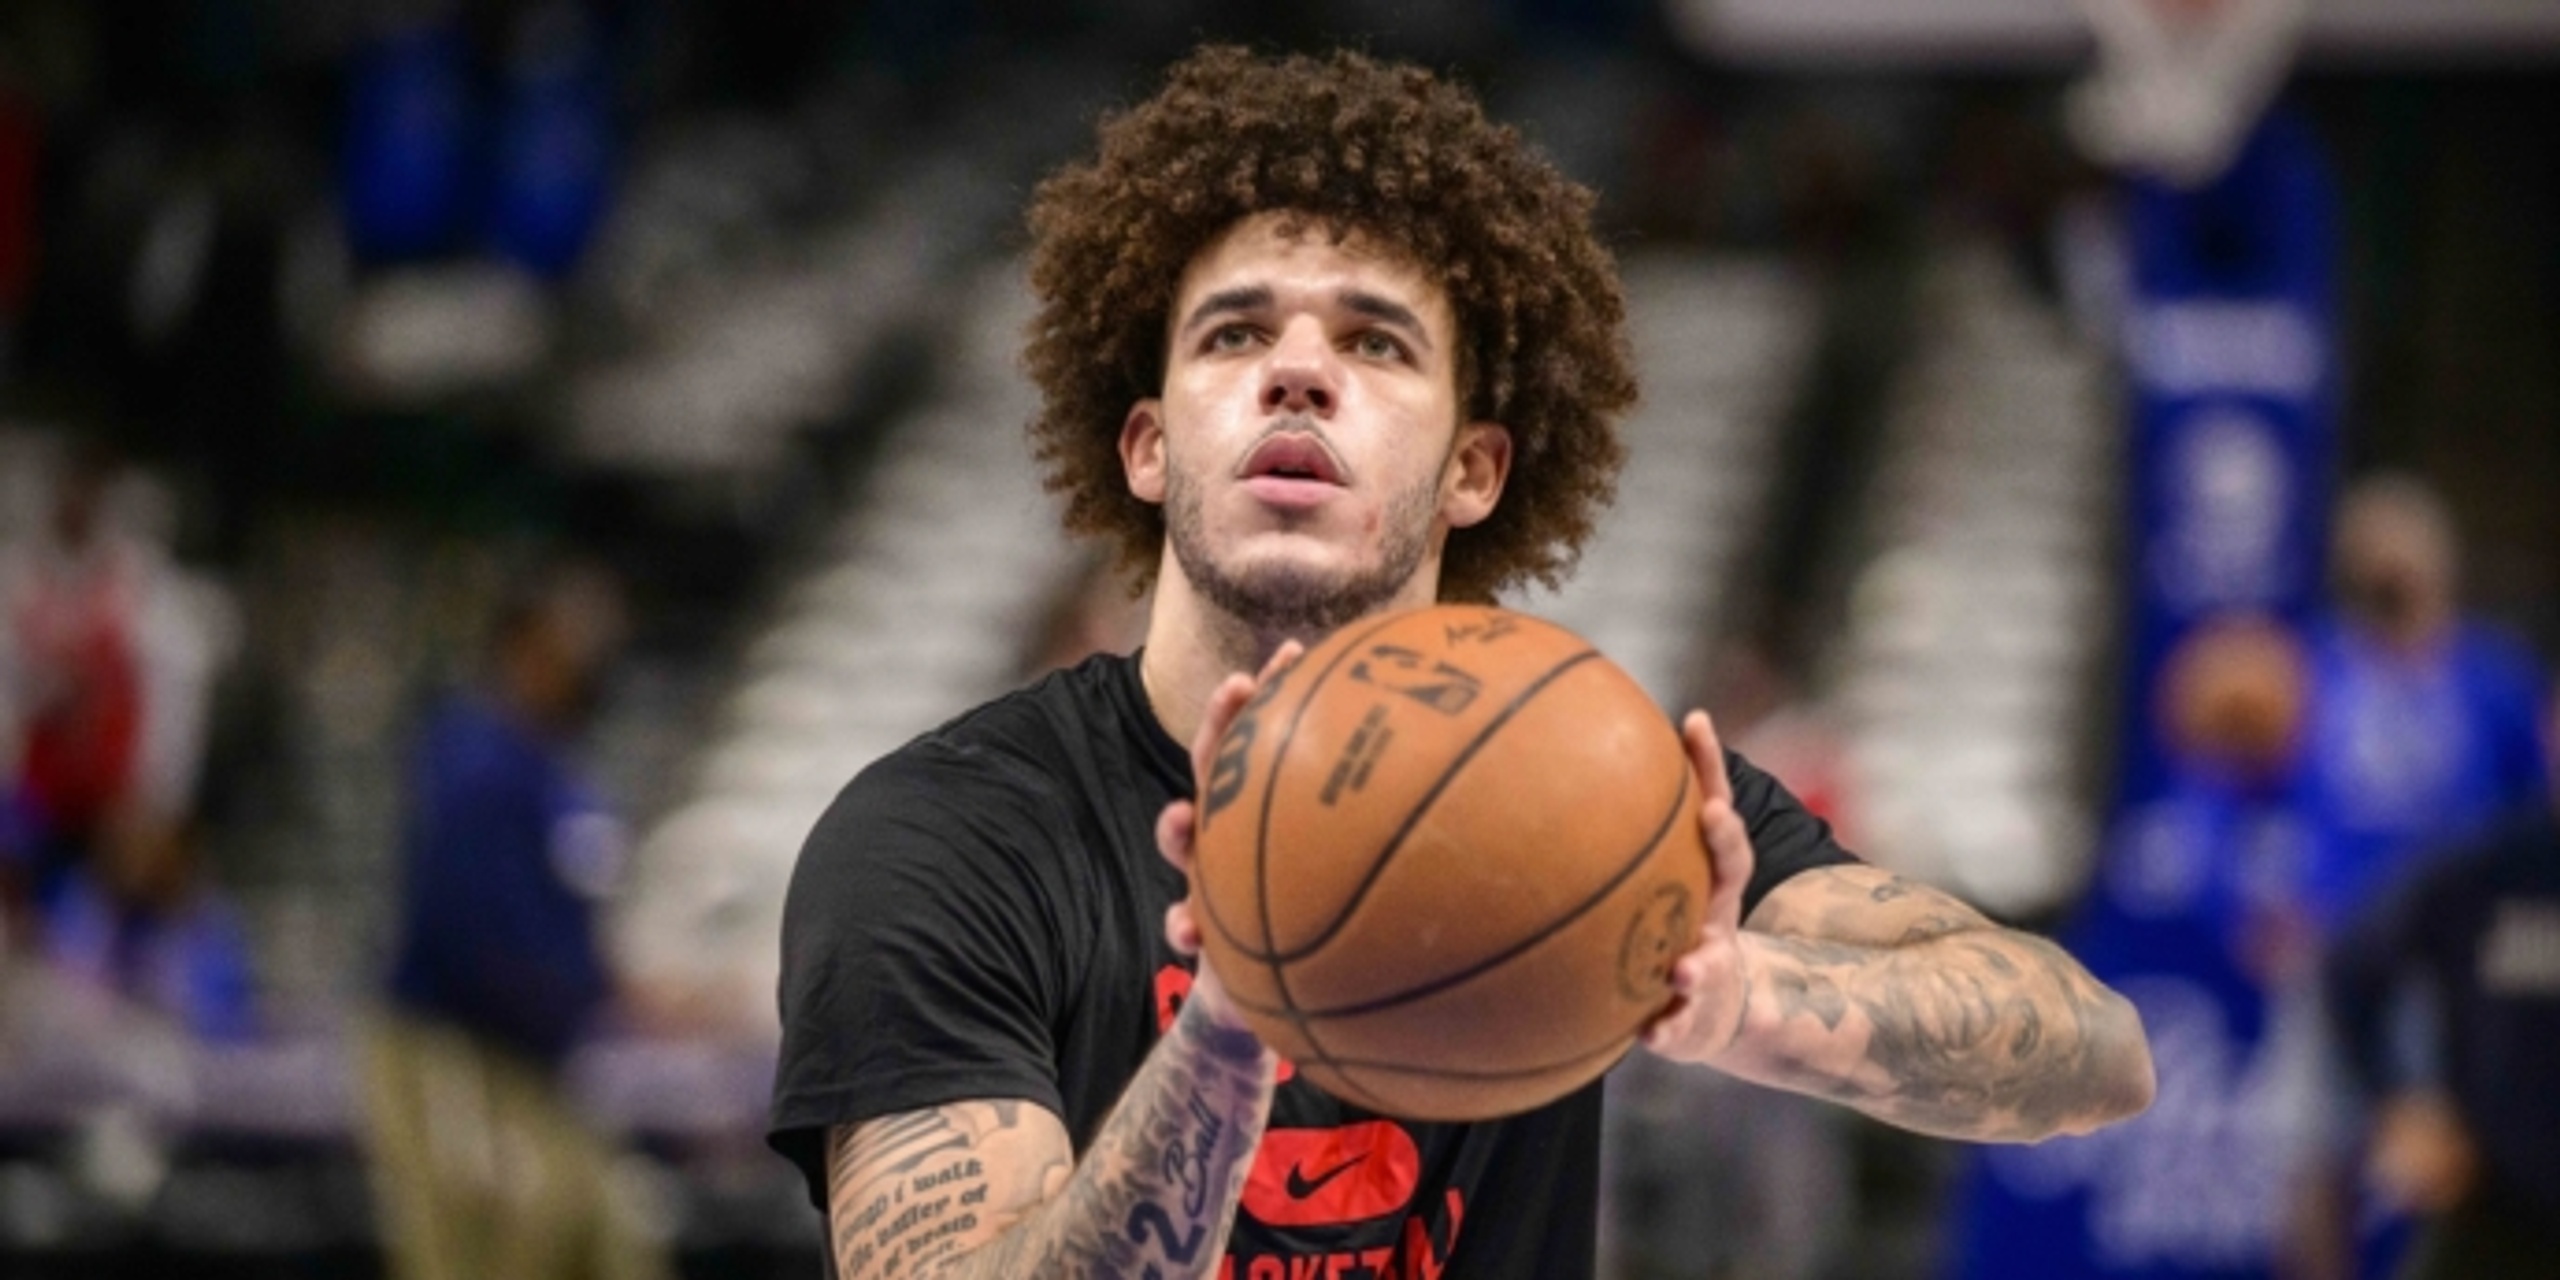 Bulls announce Lonzo Ball out 4-6 weeks due to knee procedure